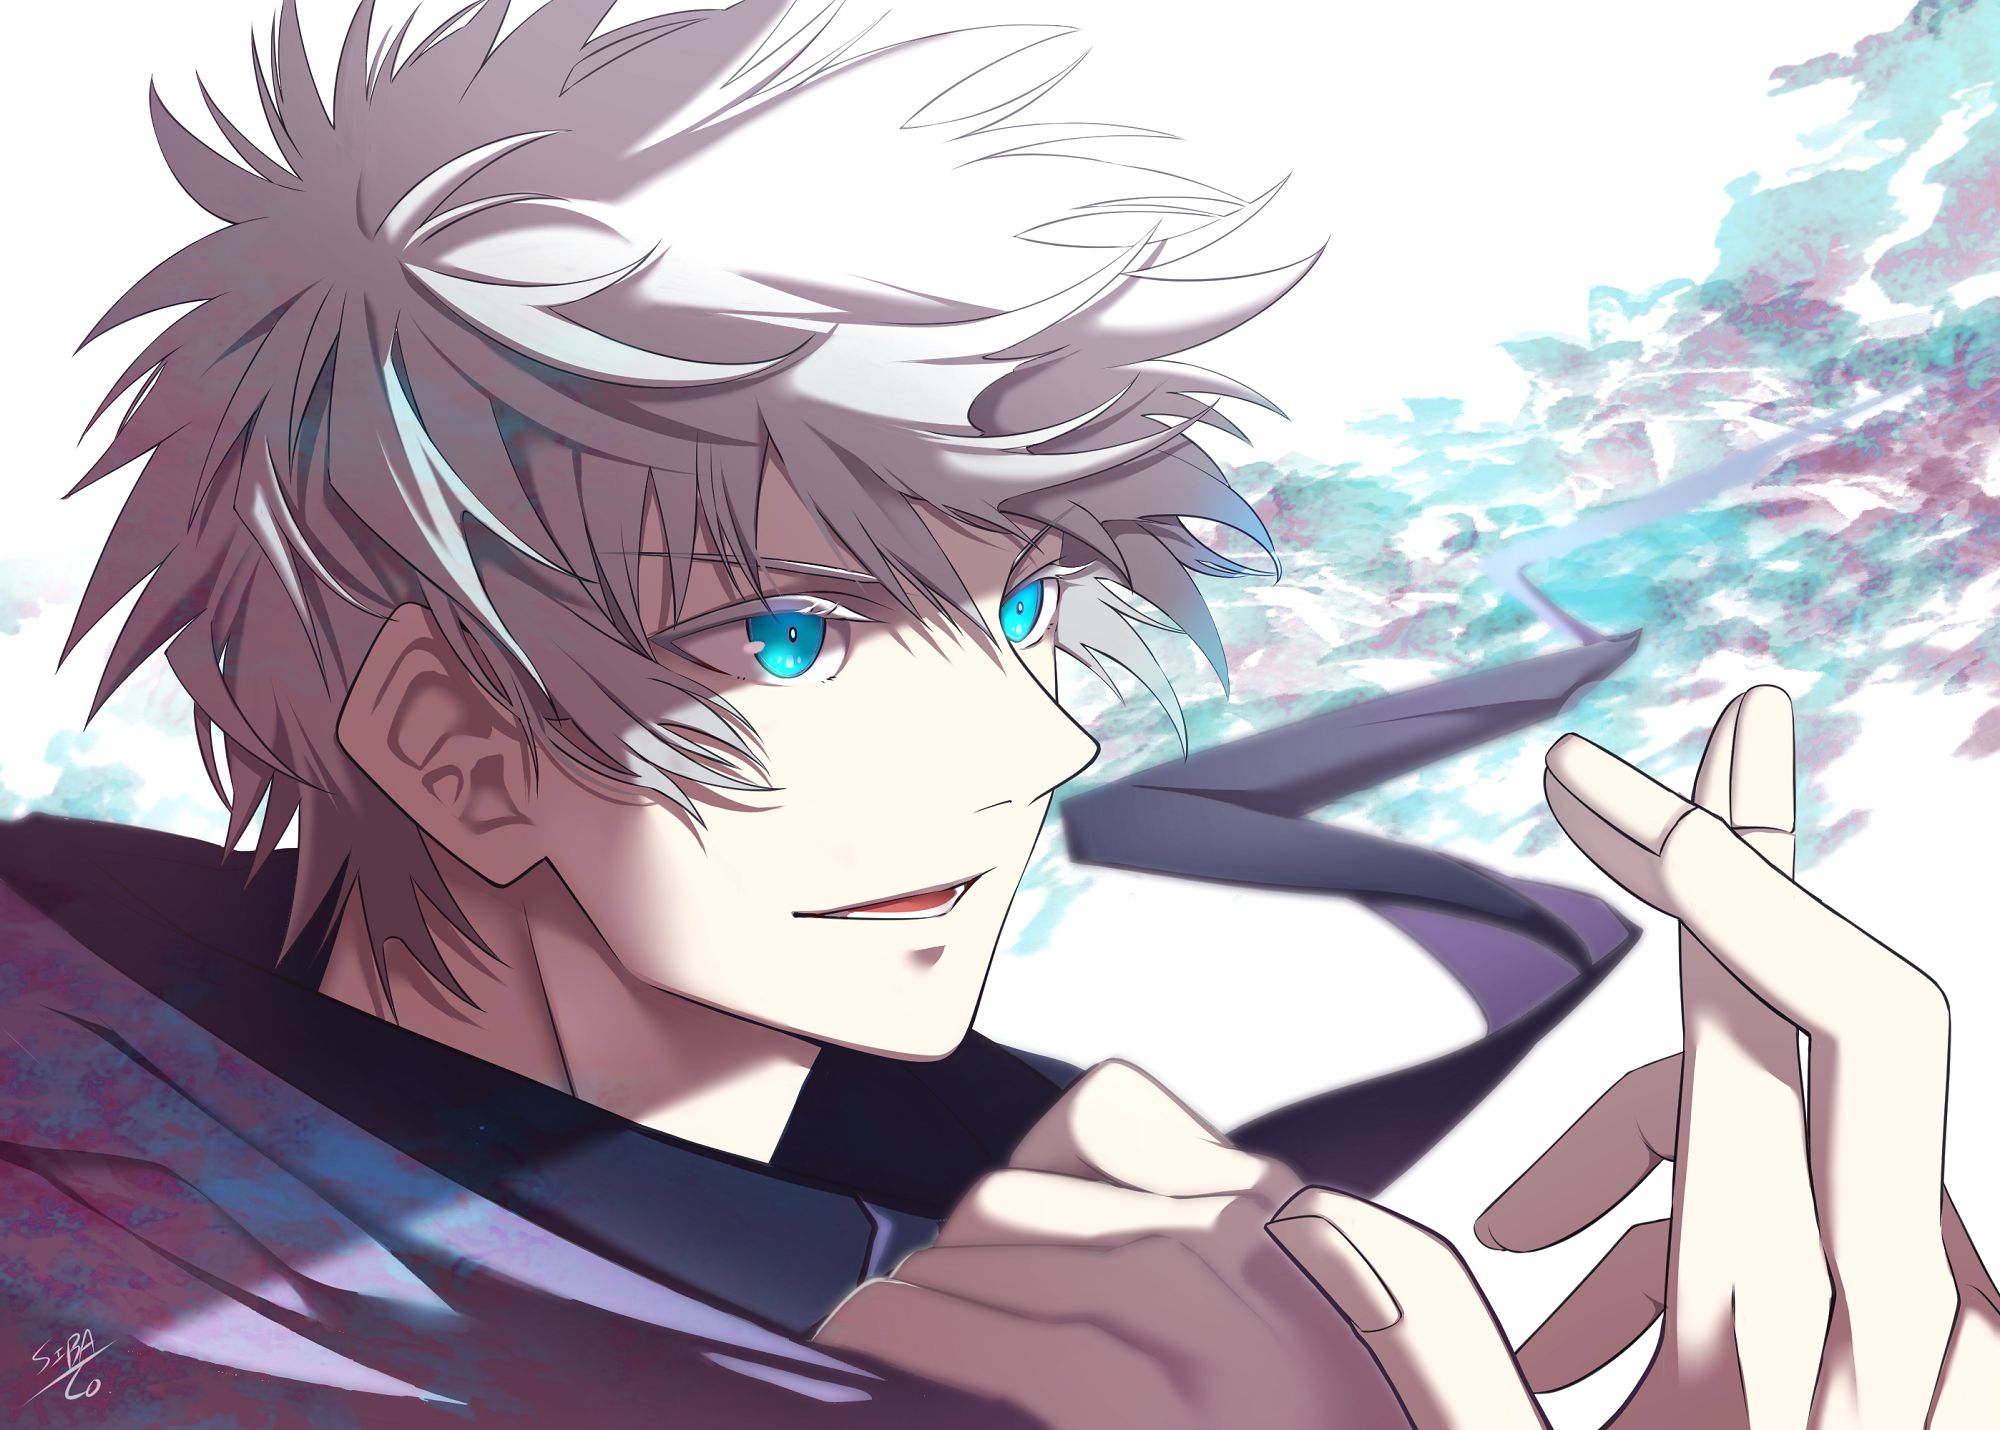 Anime character with white hair and blue eyes